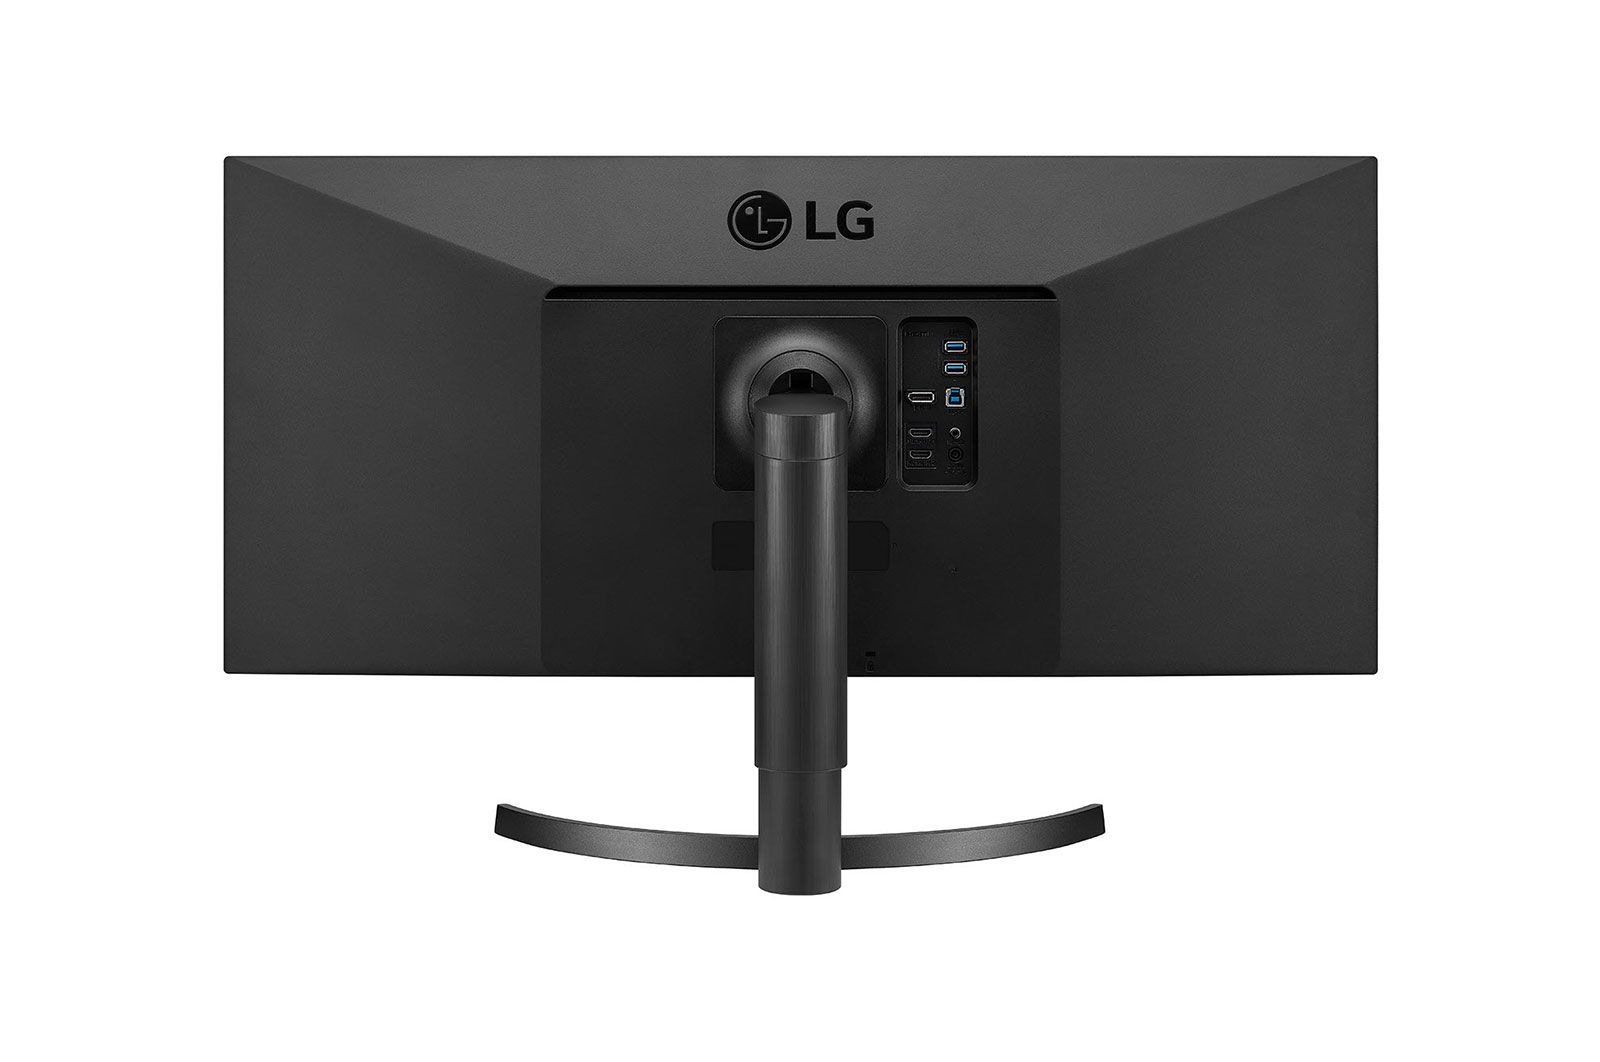 The back panel and ports of the LG 34WN750-B UltraWide QHD IPS Monitor